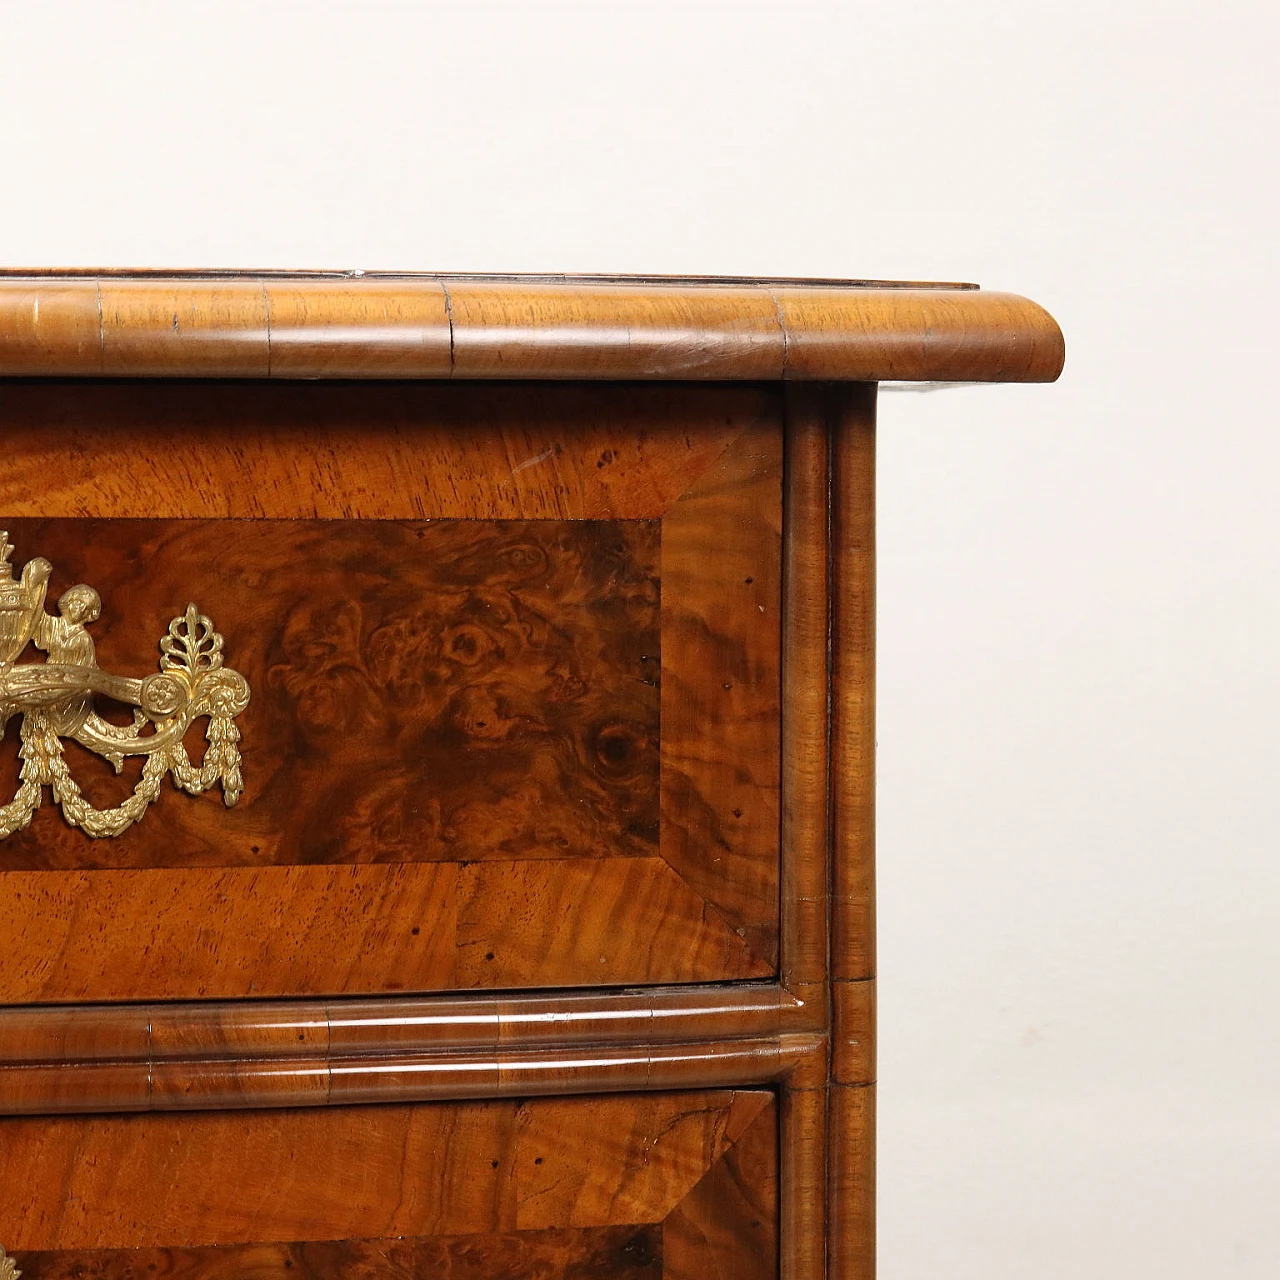 Spruce & walnut dresser with bronze handles and drawers, 18th century 4